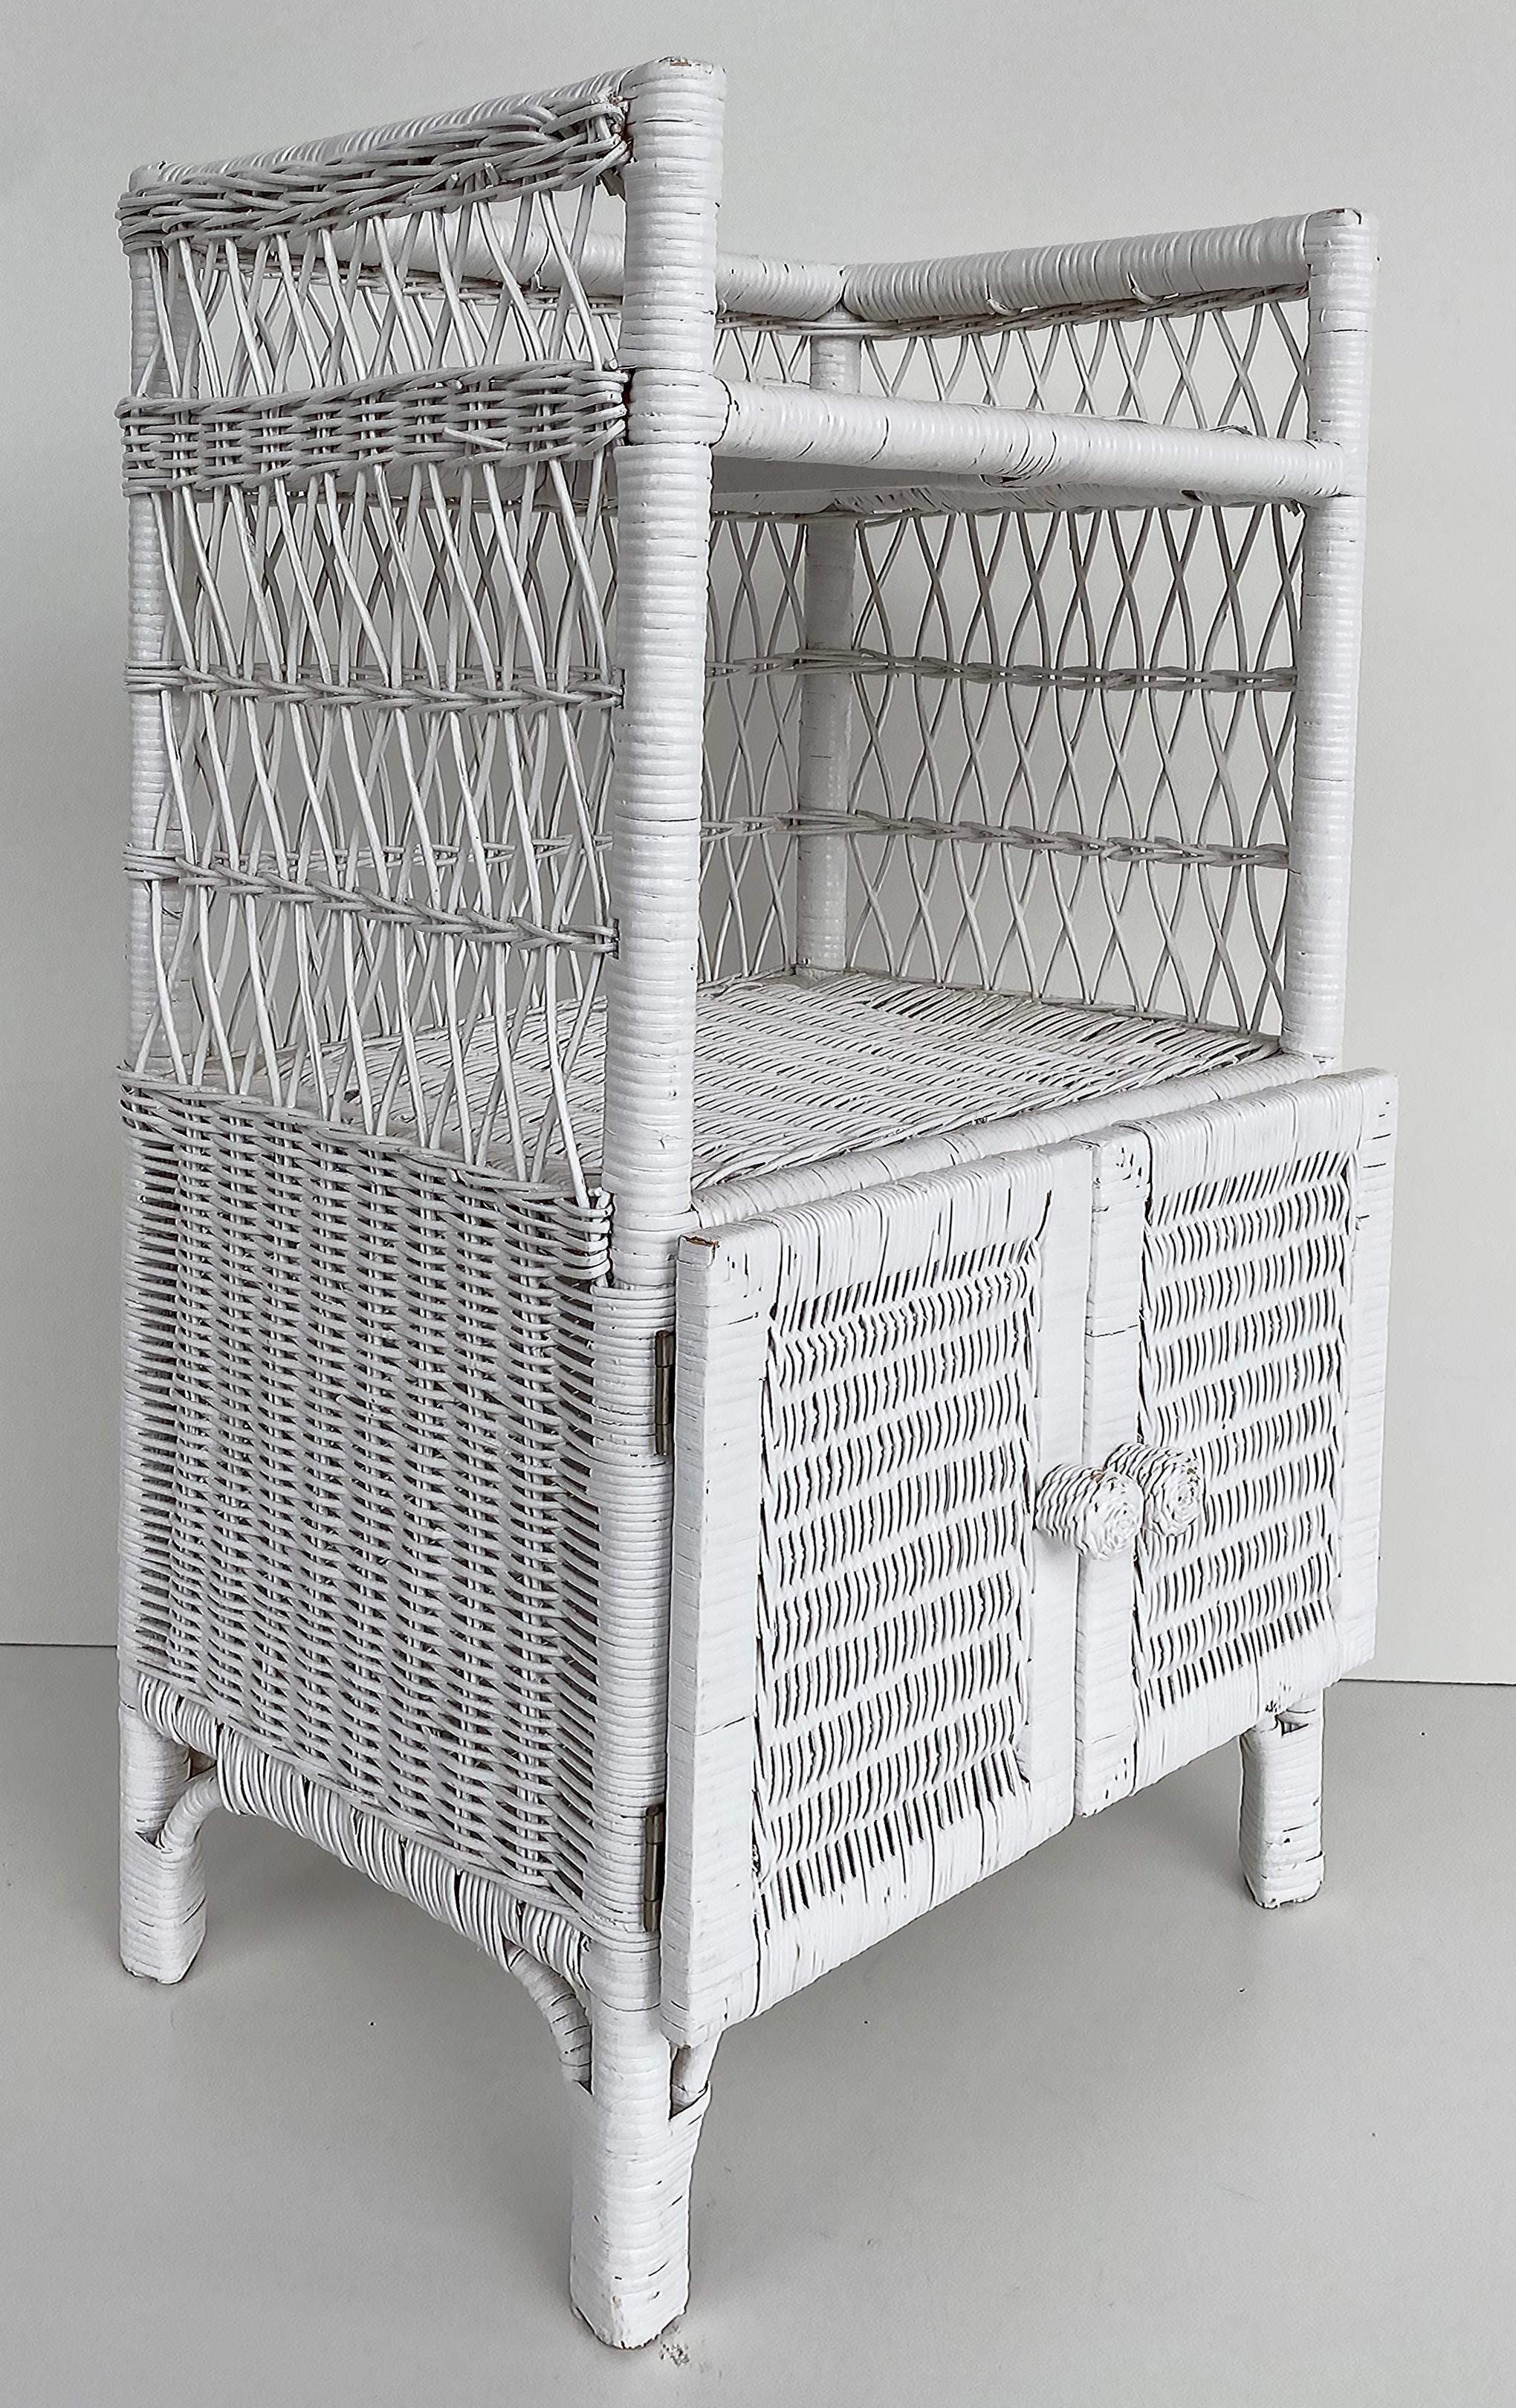 Vintage White-painted Coastal Rattan Night Stand or Side Table with Two Doors

Offered for sale is a vintage small cabinet that is perfect as a nightstand in a Coastal tropical bedroom or even as a storage cabinet in a bathroom.